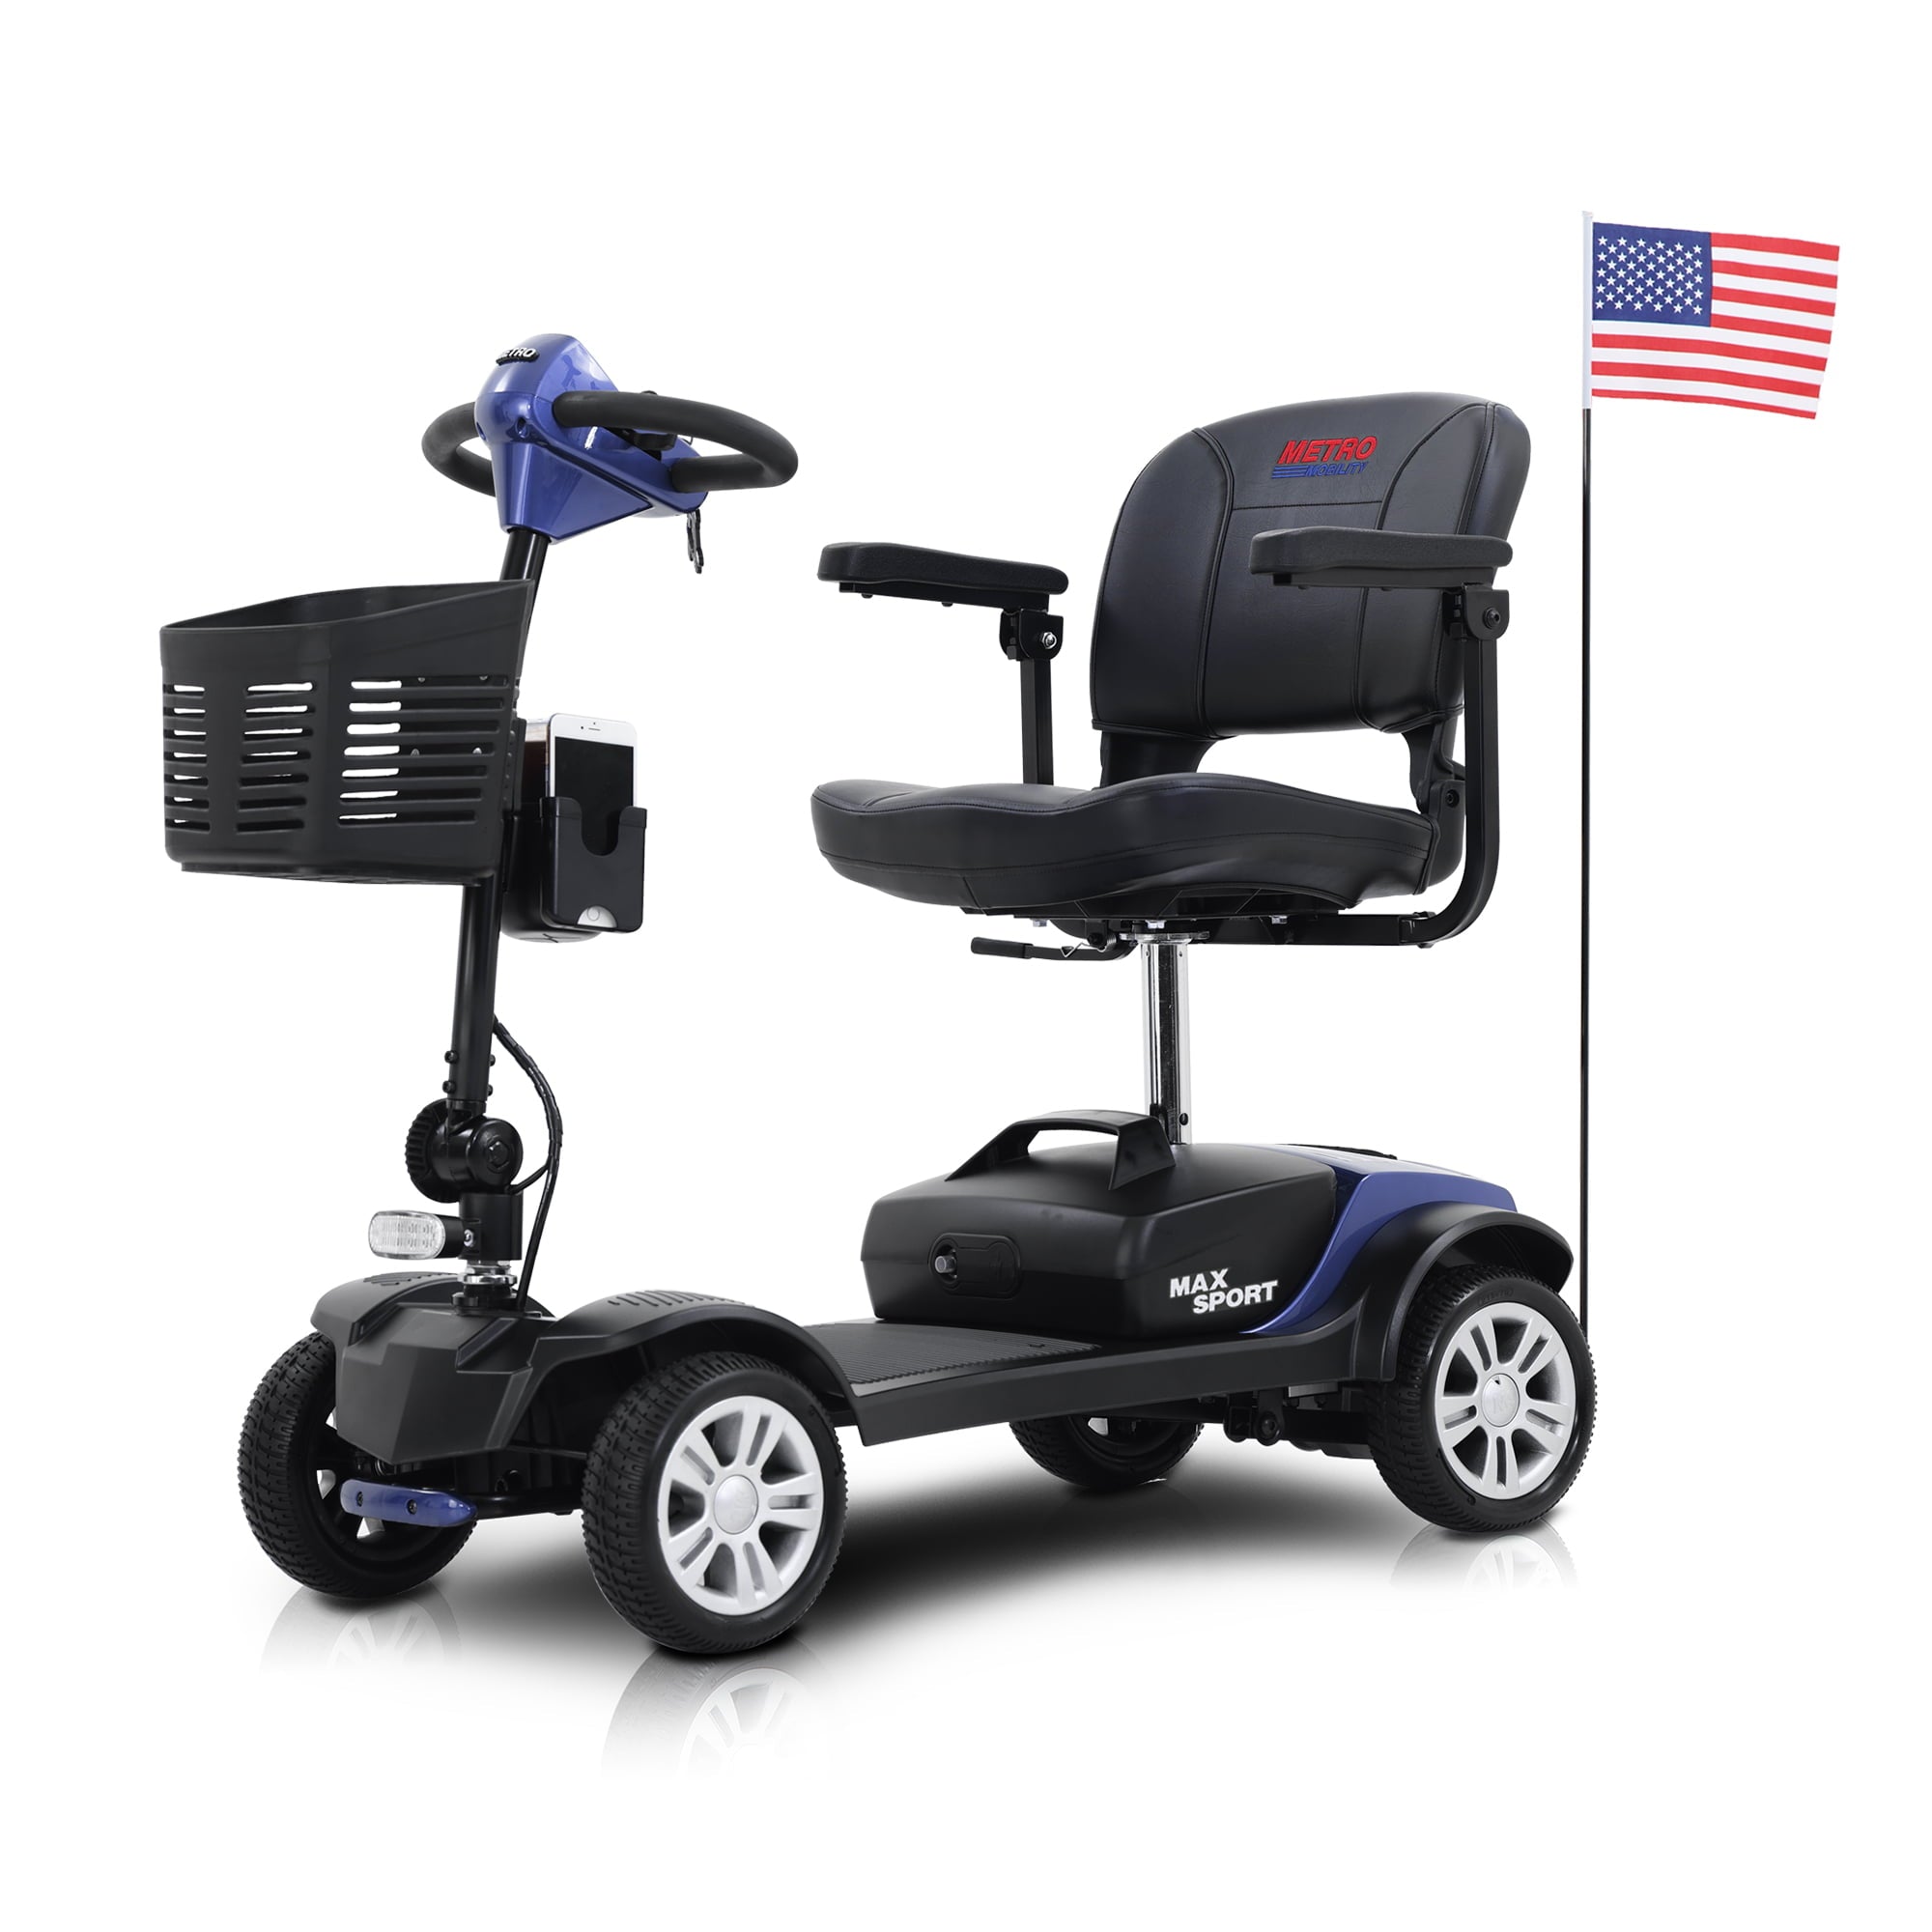 Carevas SPORT BLUE 4 Wheels Outdoor Compact Mobility Scooter with 2 in 1 Cup & Phone Holder